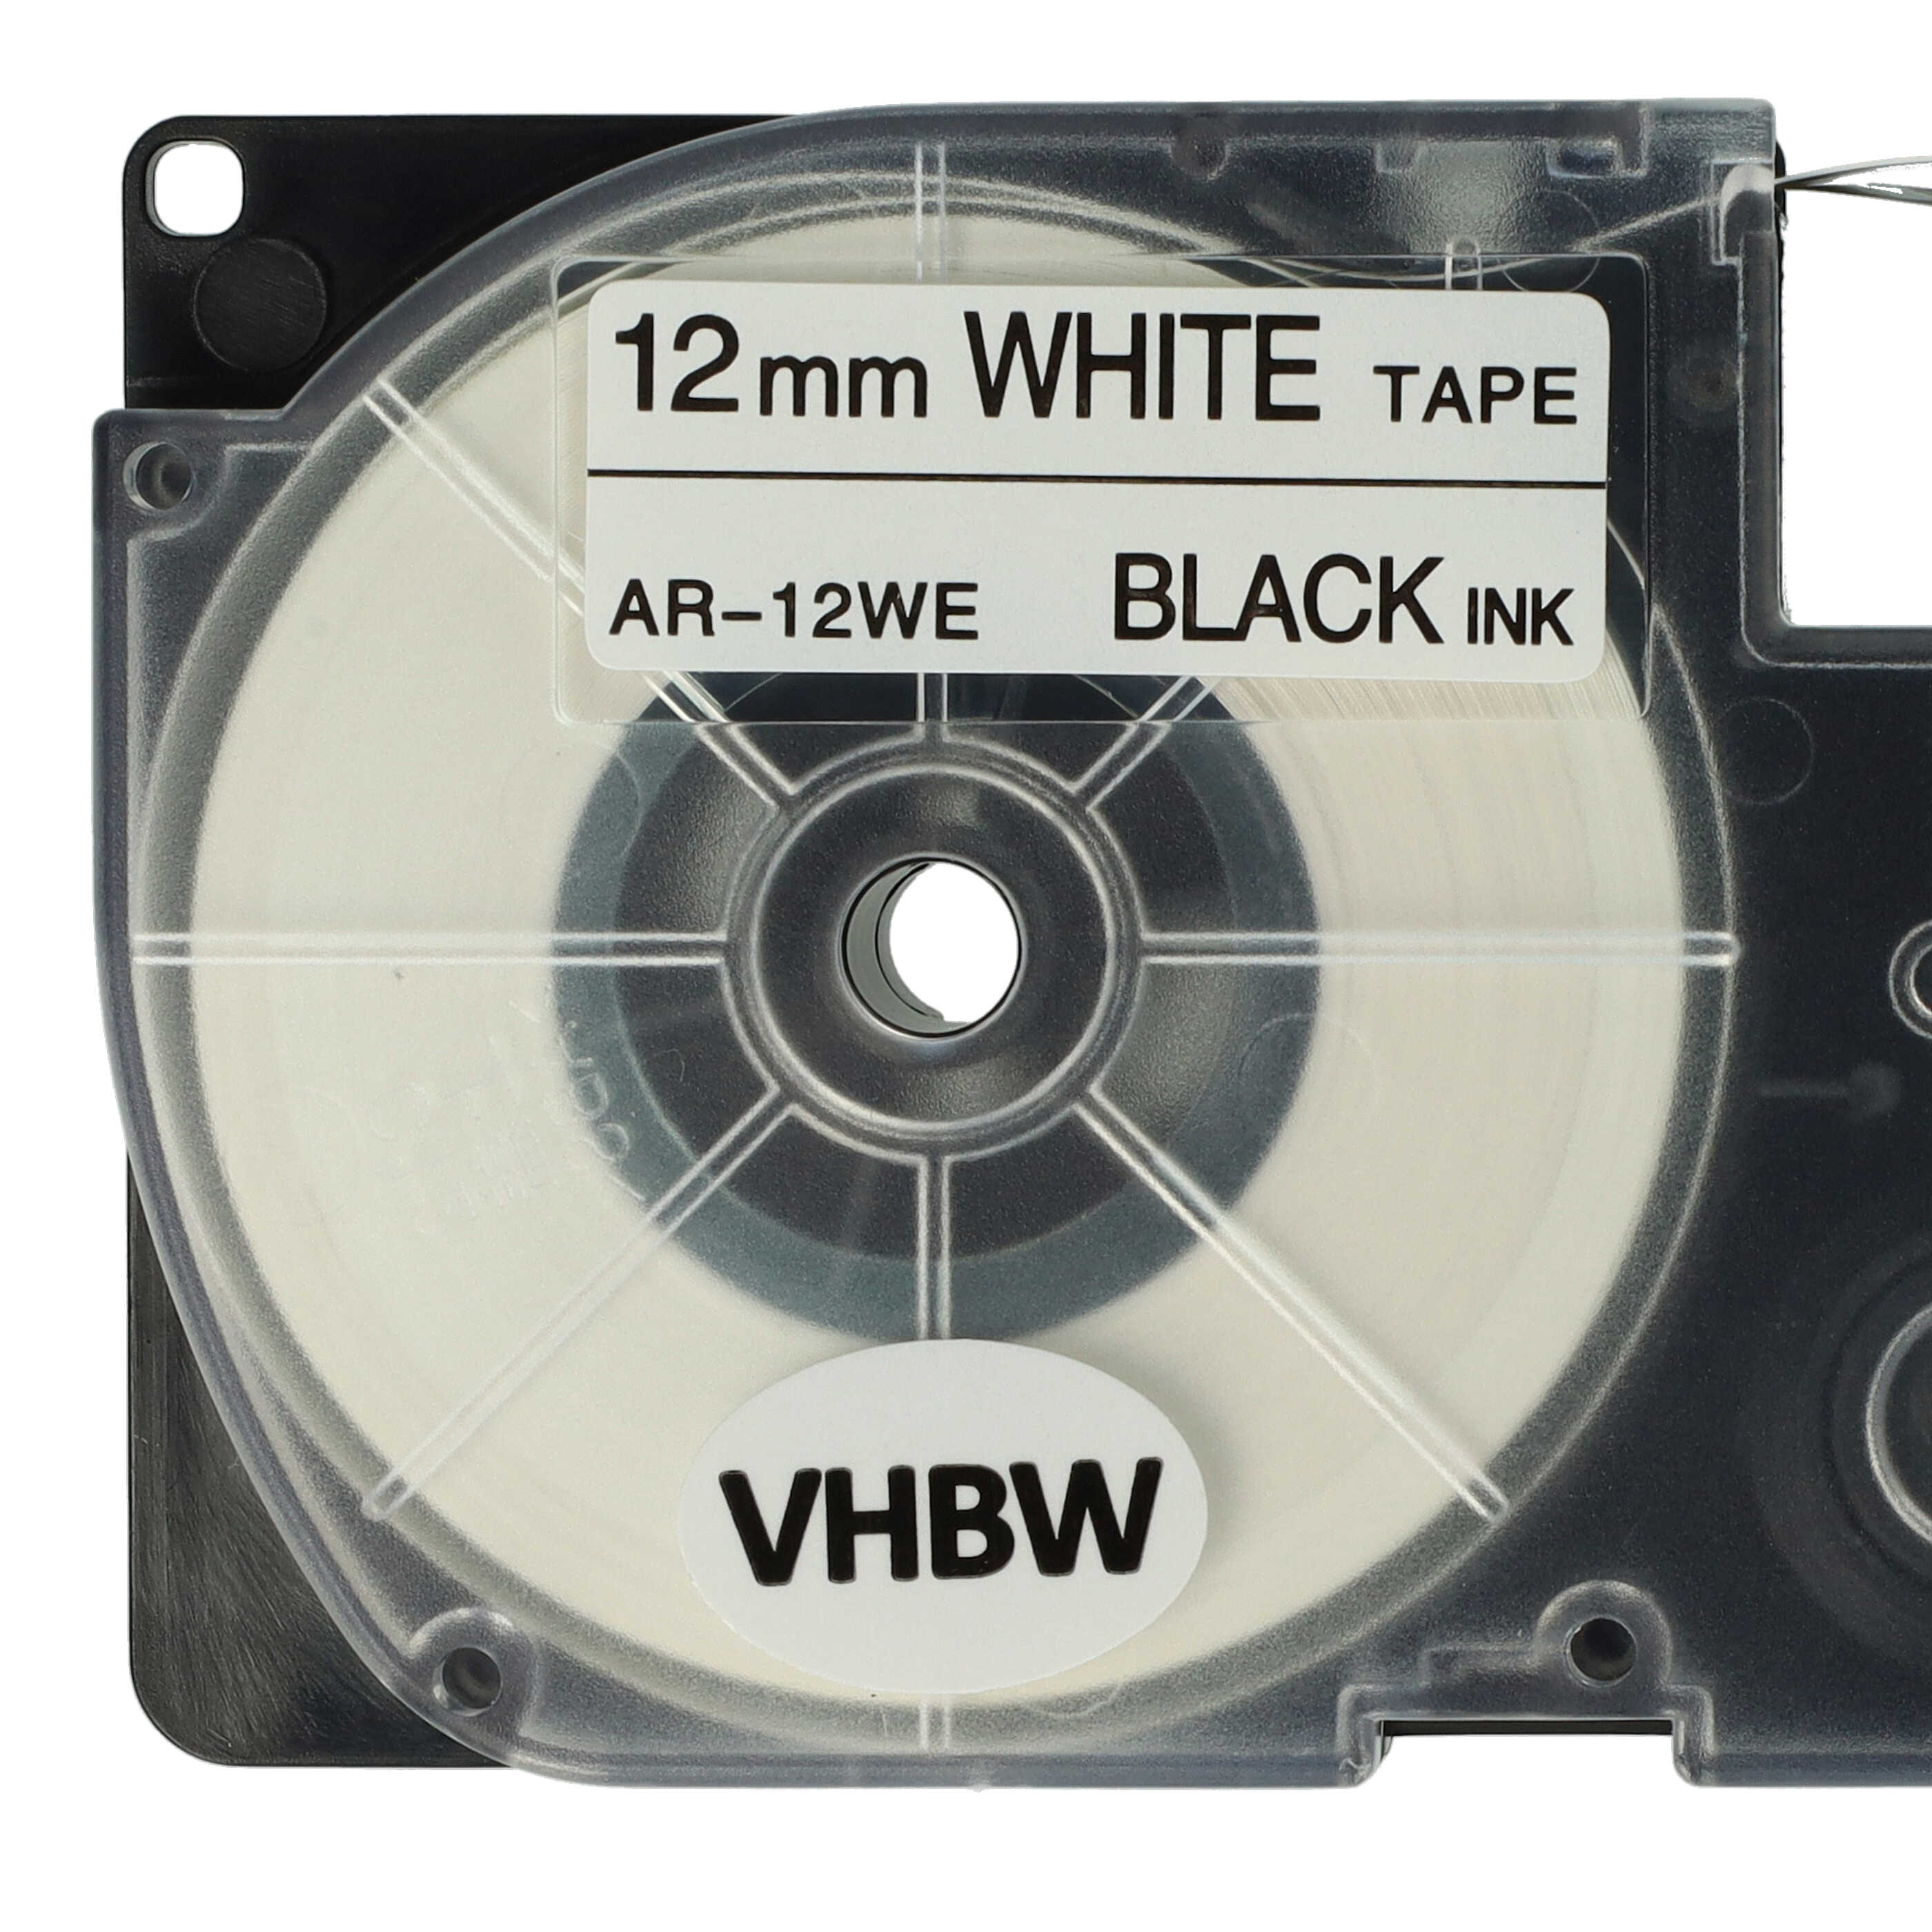 2x Label Tape as Replacement for Casio XR-12WE, XR-12WE1 - 12 mm Black to White